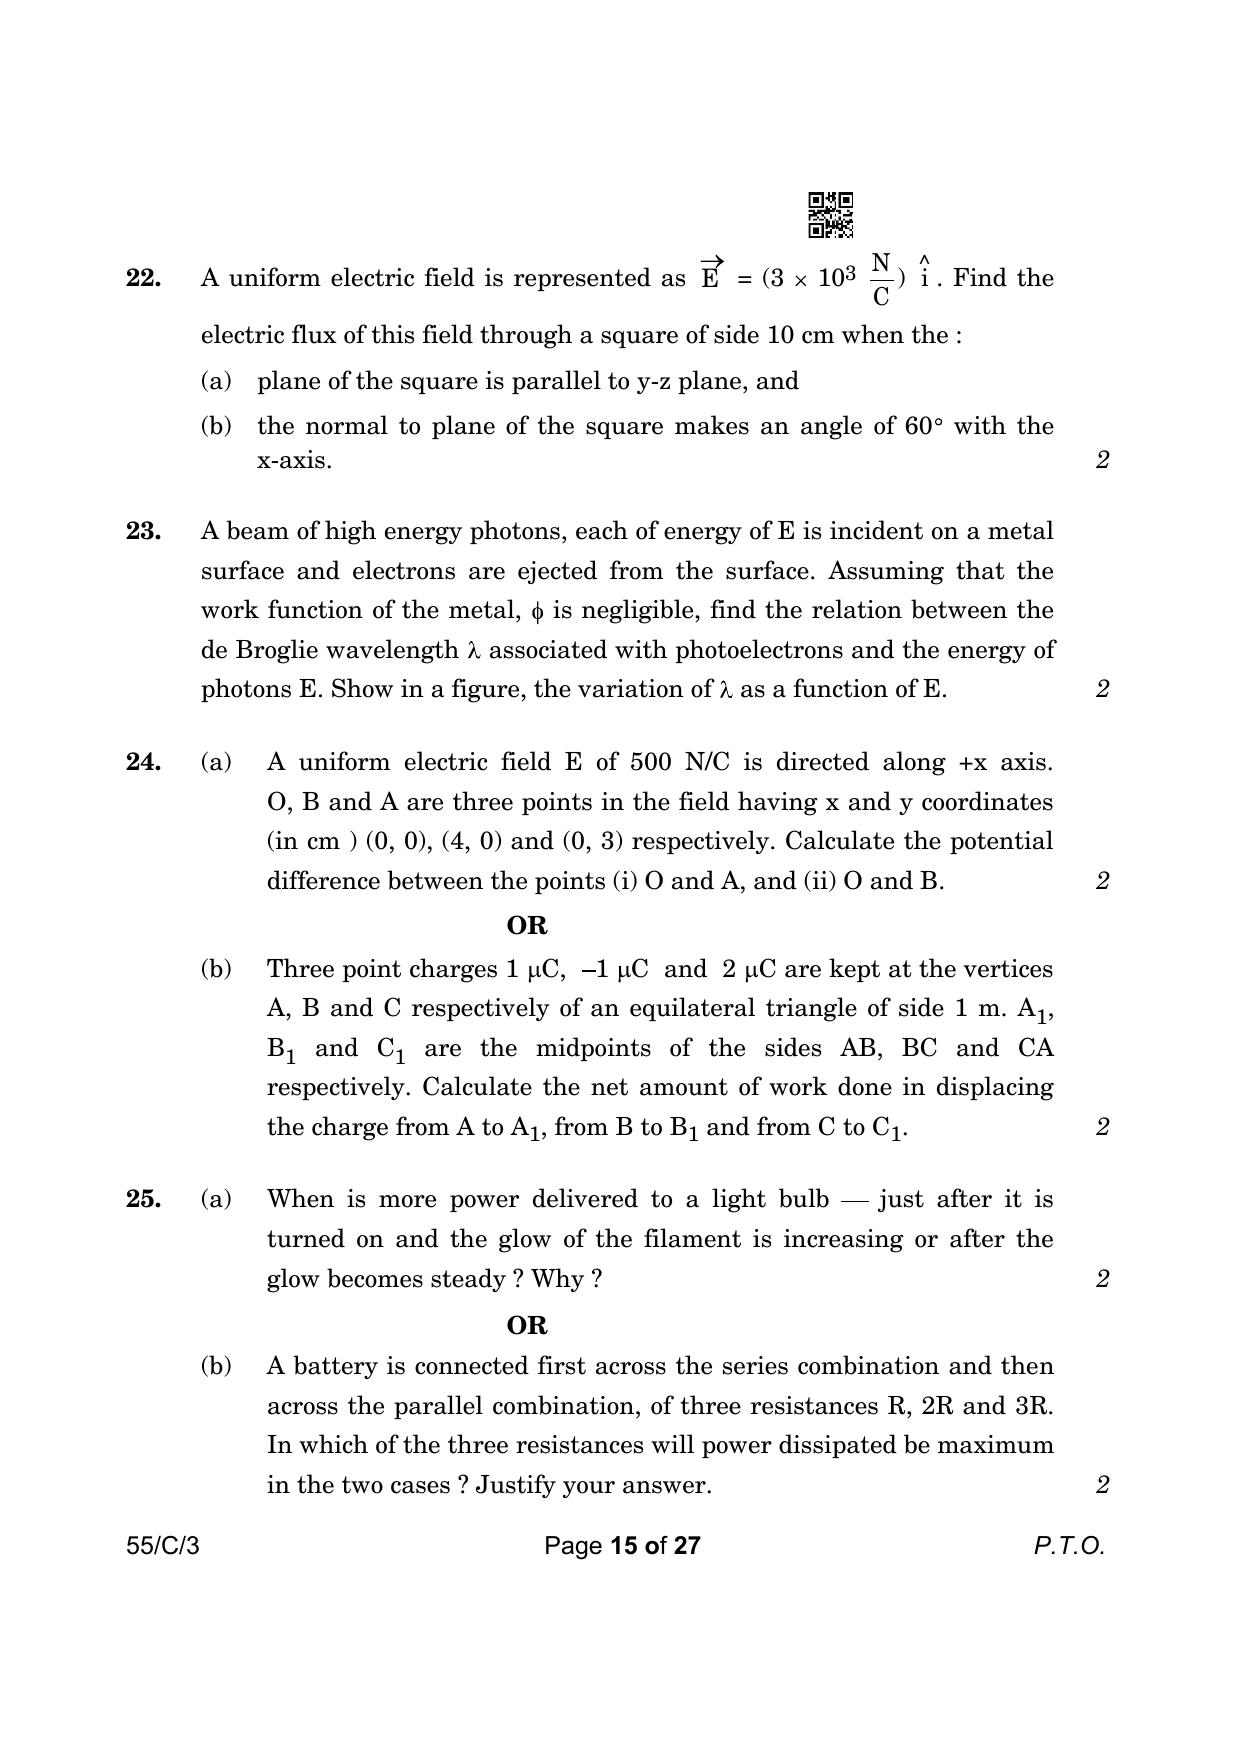 CBSE Class 12 55-3 Physics 2023 (Compartment) Question Paper - Page 15